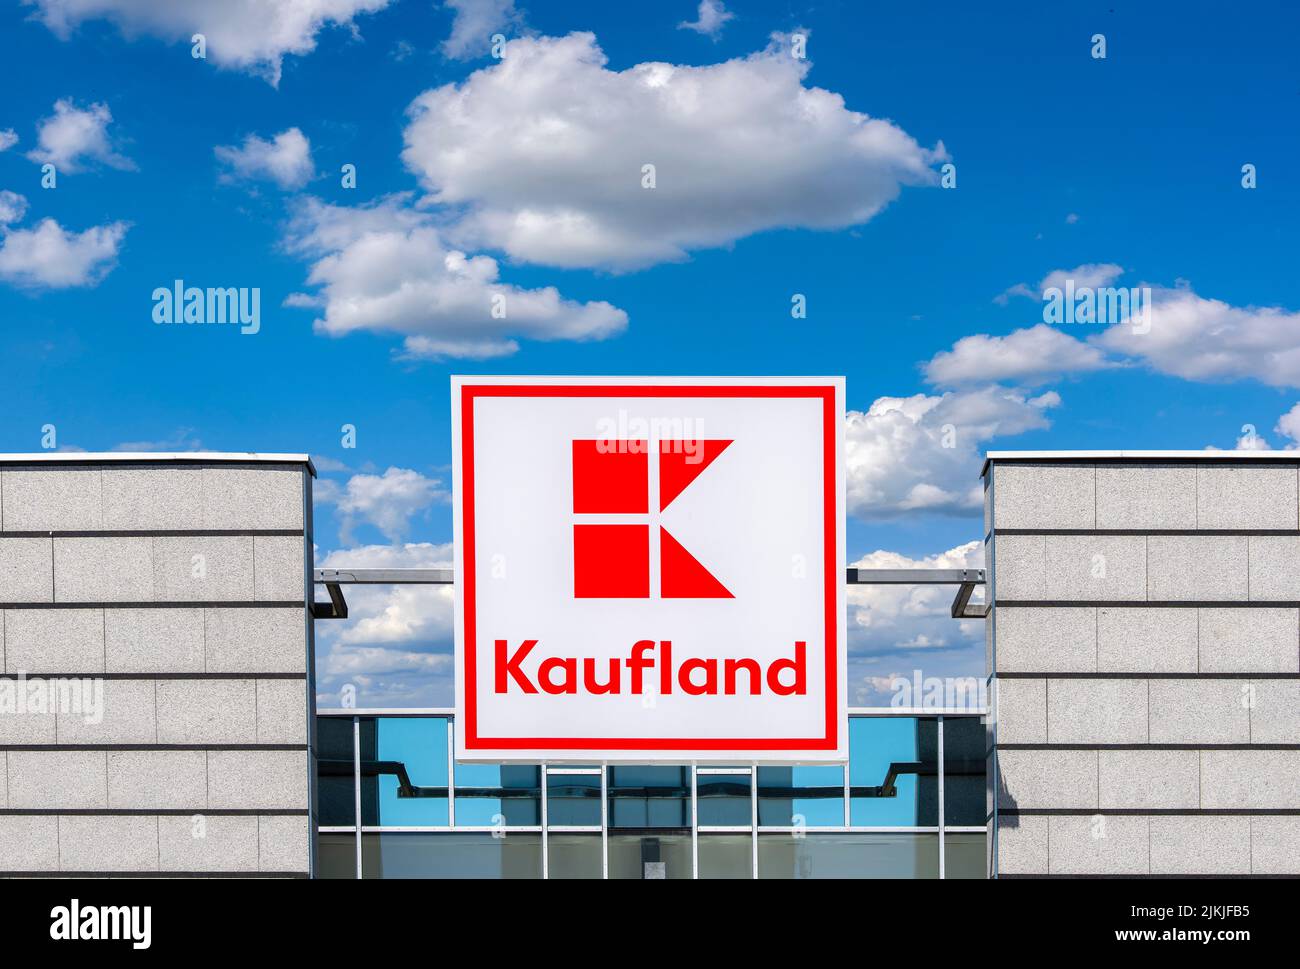 Building and advertising sign from the company Kaufland Stock Photo